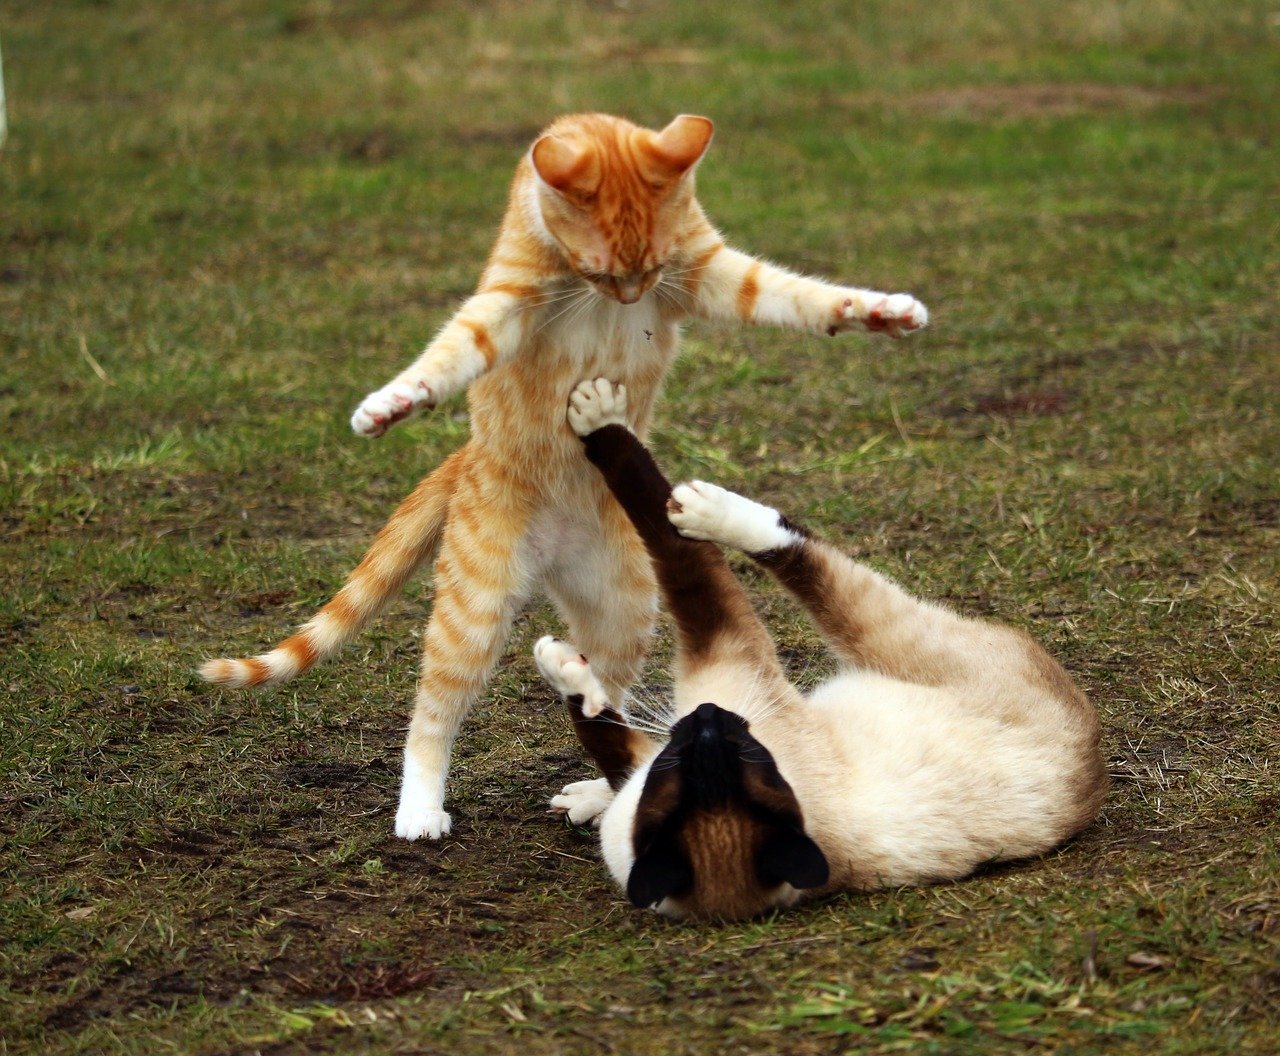 Understanding Why Cats Fight